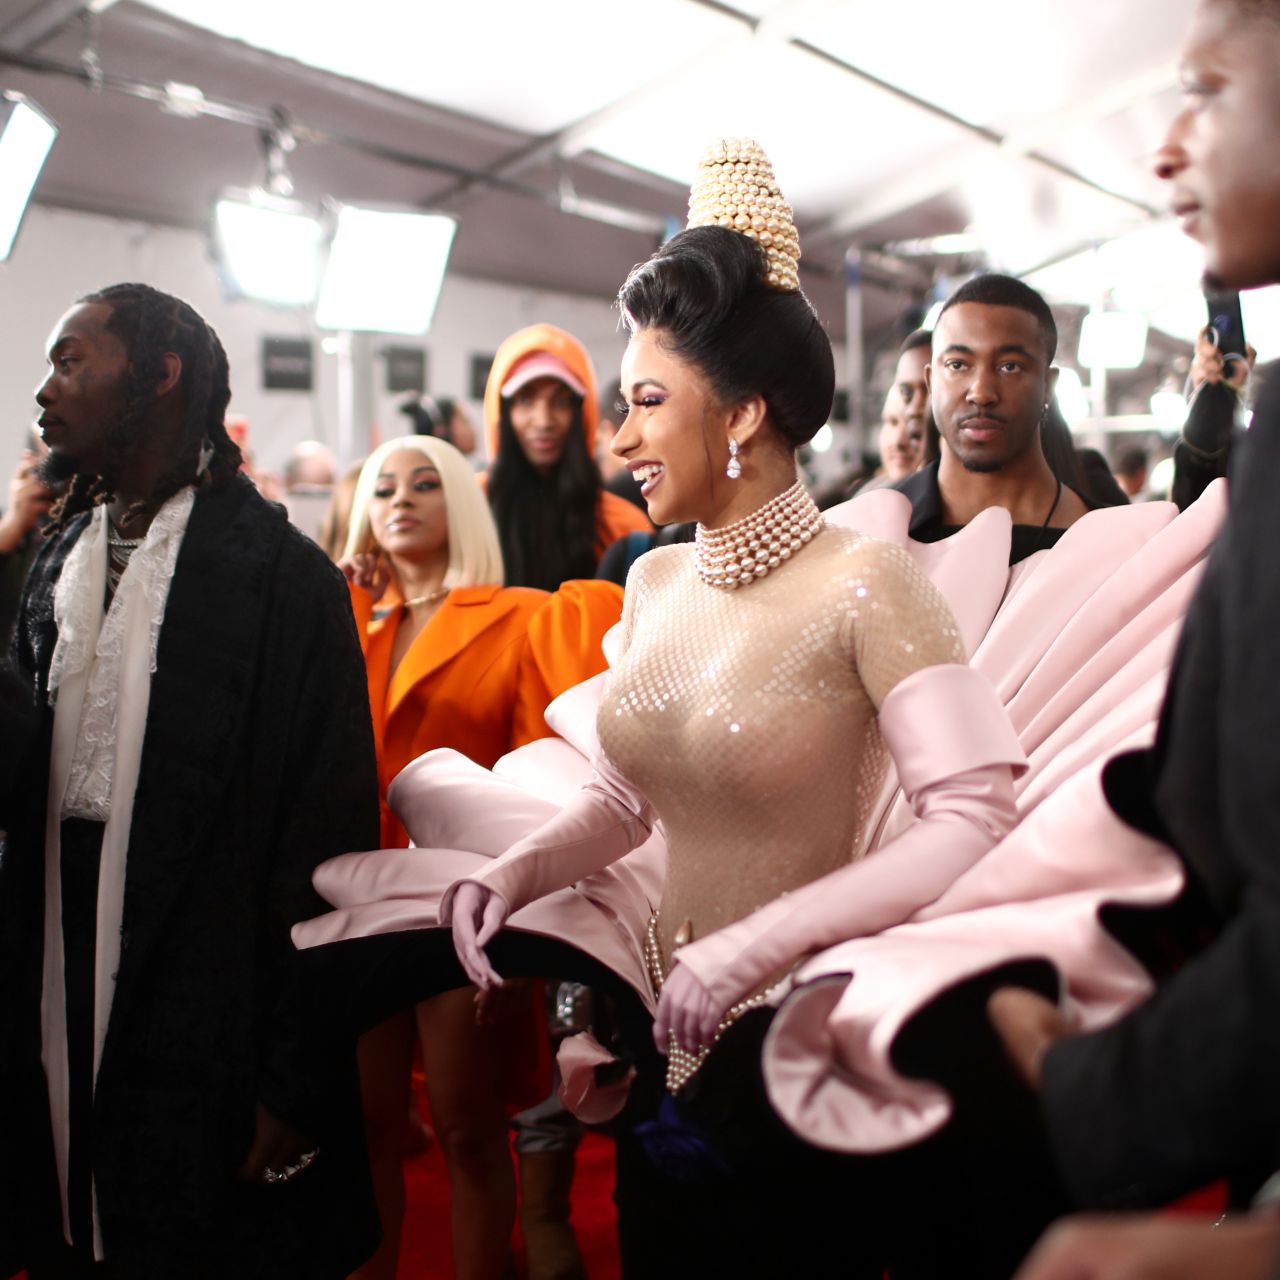 Cardi B walks the red carpet at the 2019 Grammys in a dress from Thierry Mugler's archive.